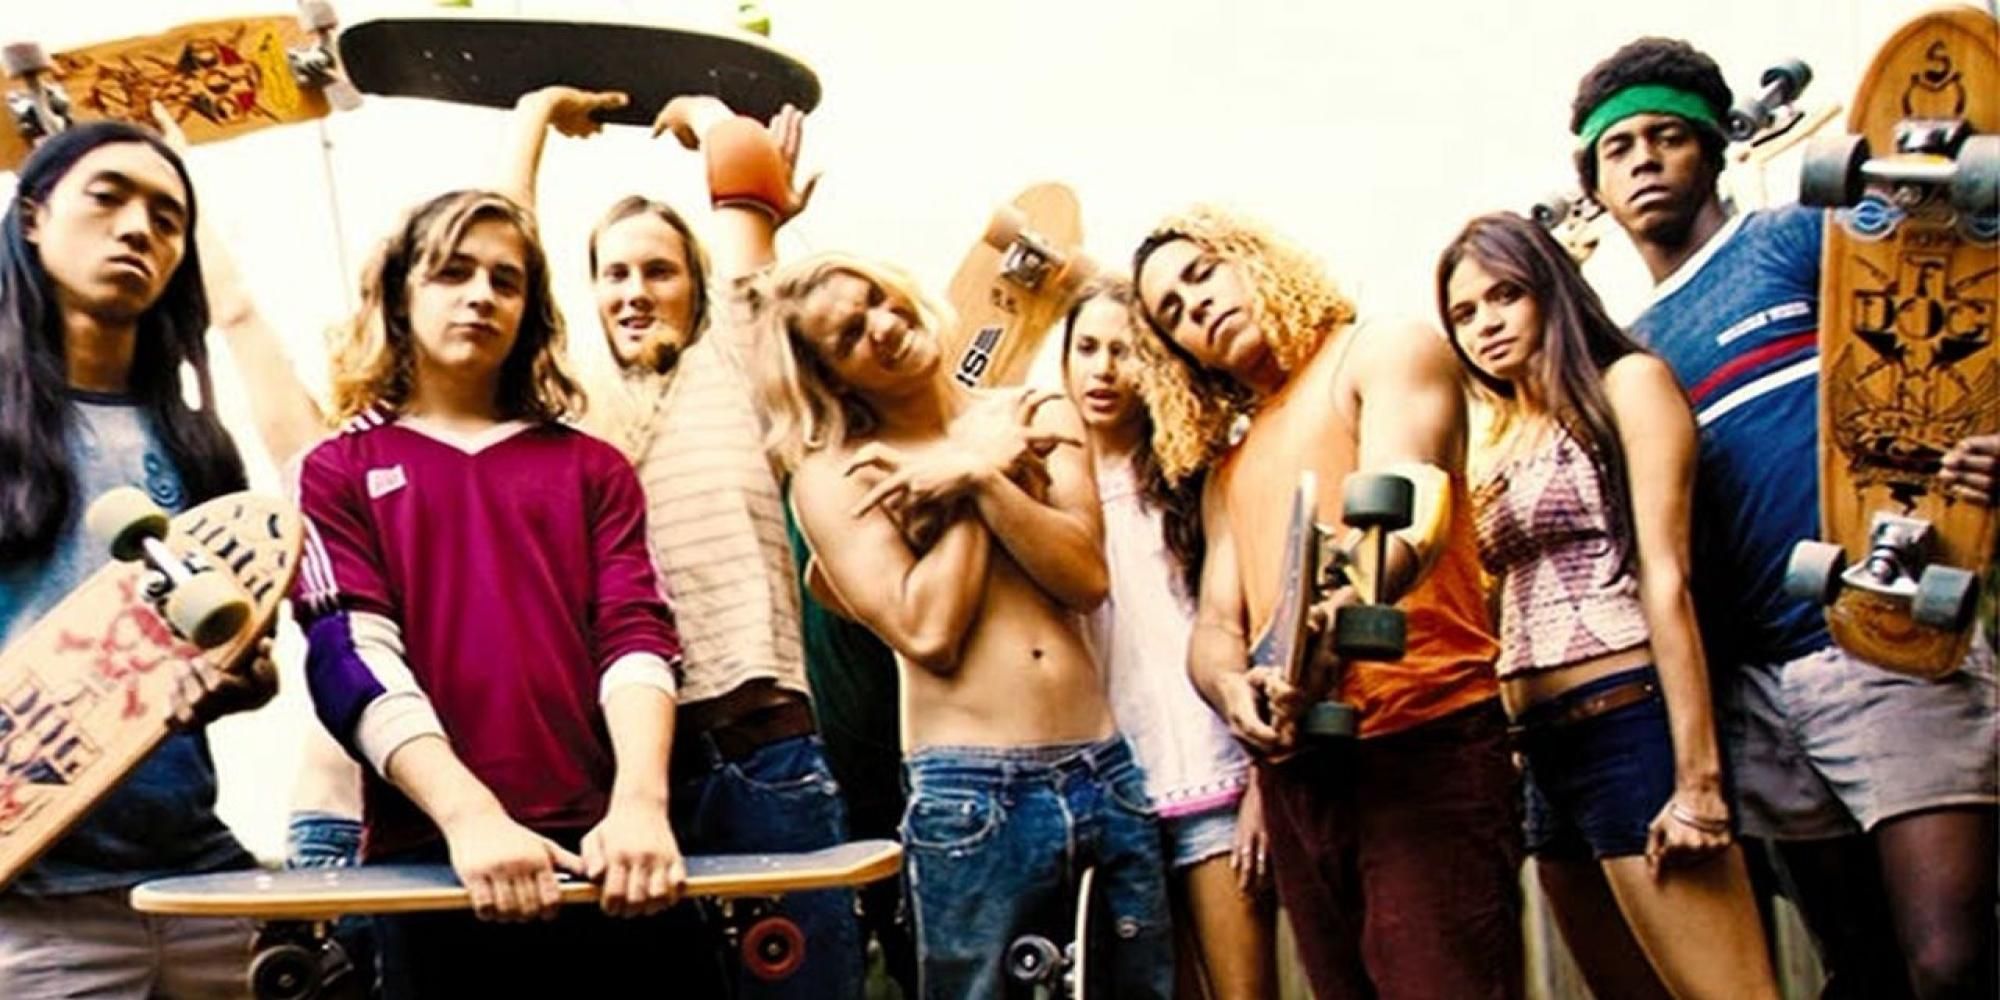 New Lords Of Dogtown Tv Show Coming To Imdb Tv Screen Rant